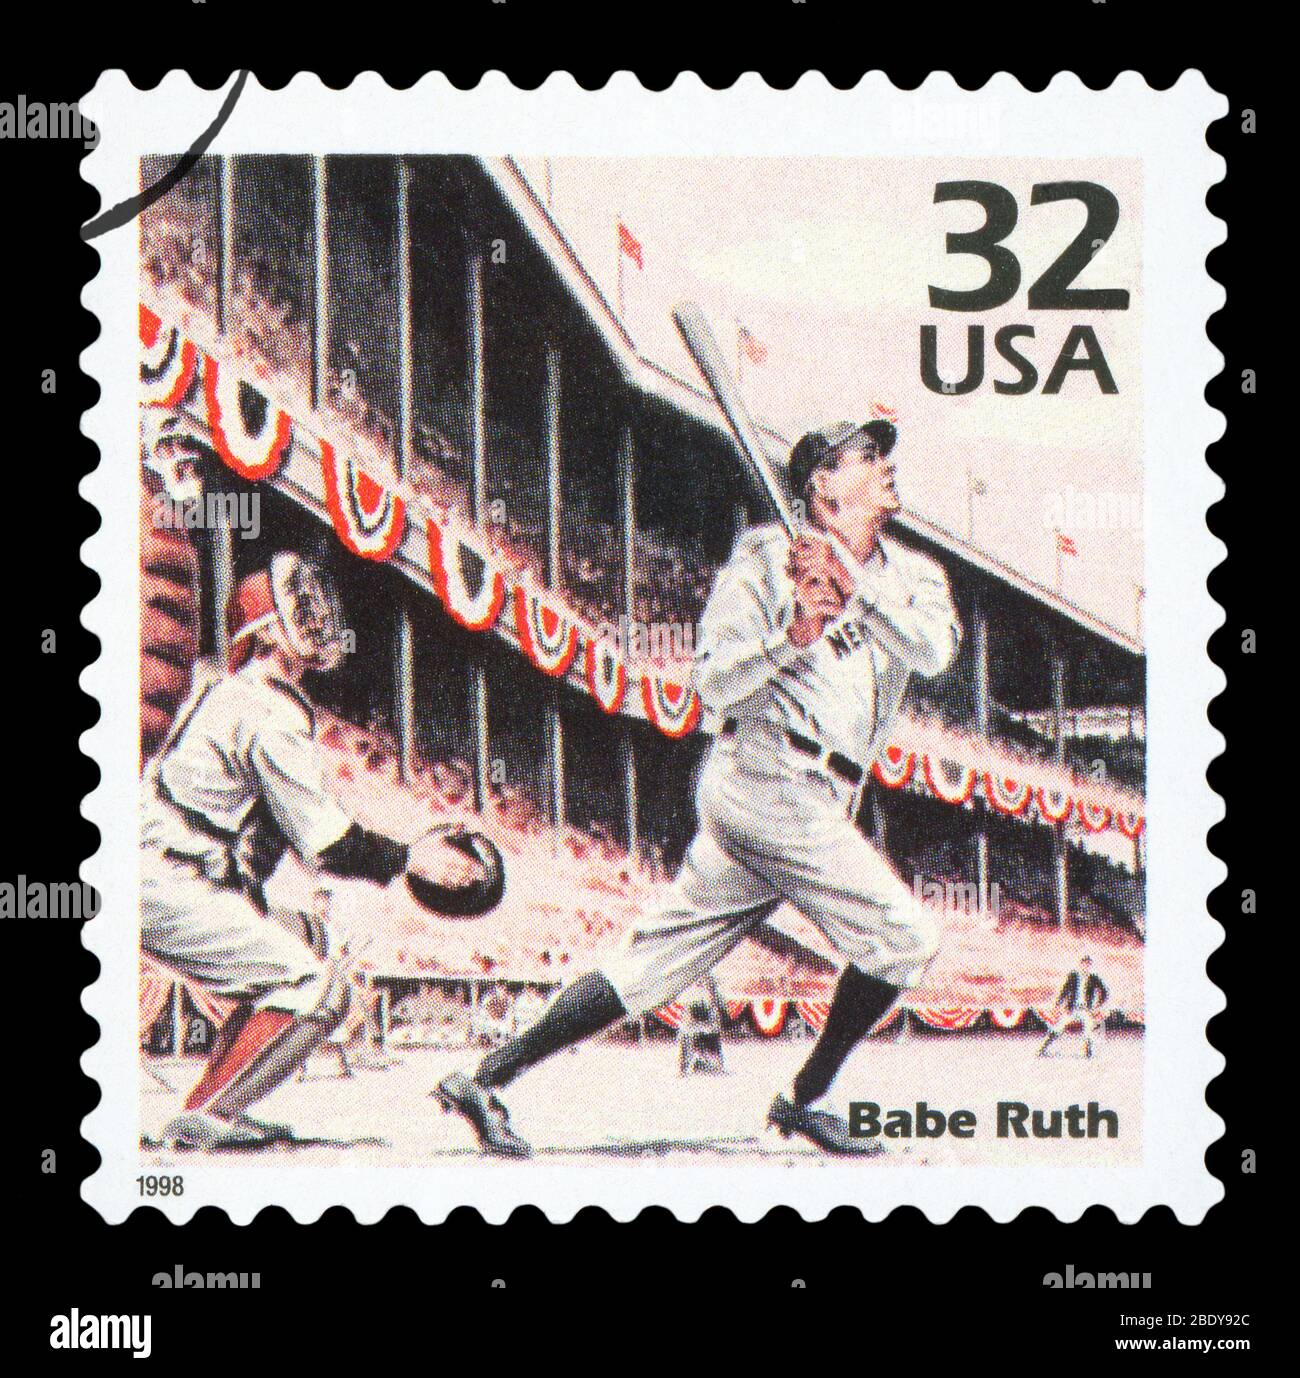 UNITED STATES OF AMERICA, CIRCA 1998: A postage stamp printed in USA showing an image of Babe Ruth, CIRCA 1998. Stock Photo